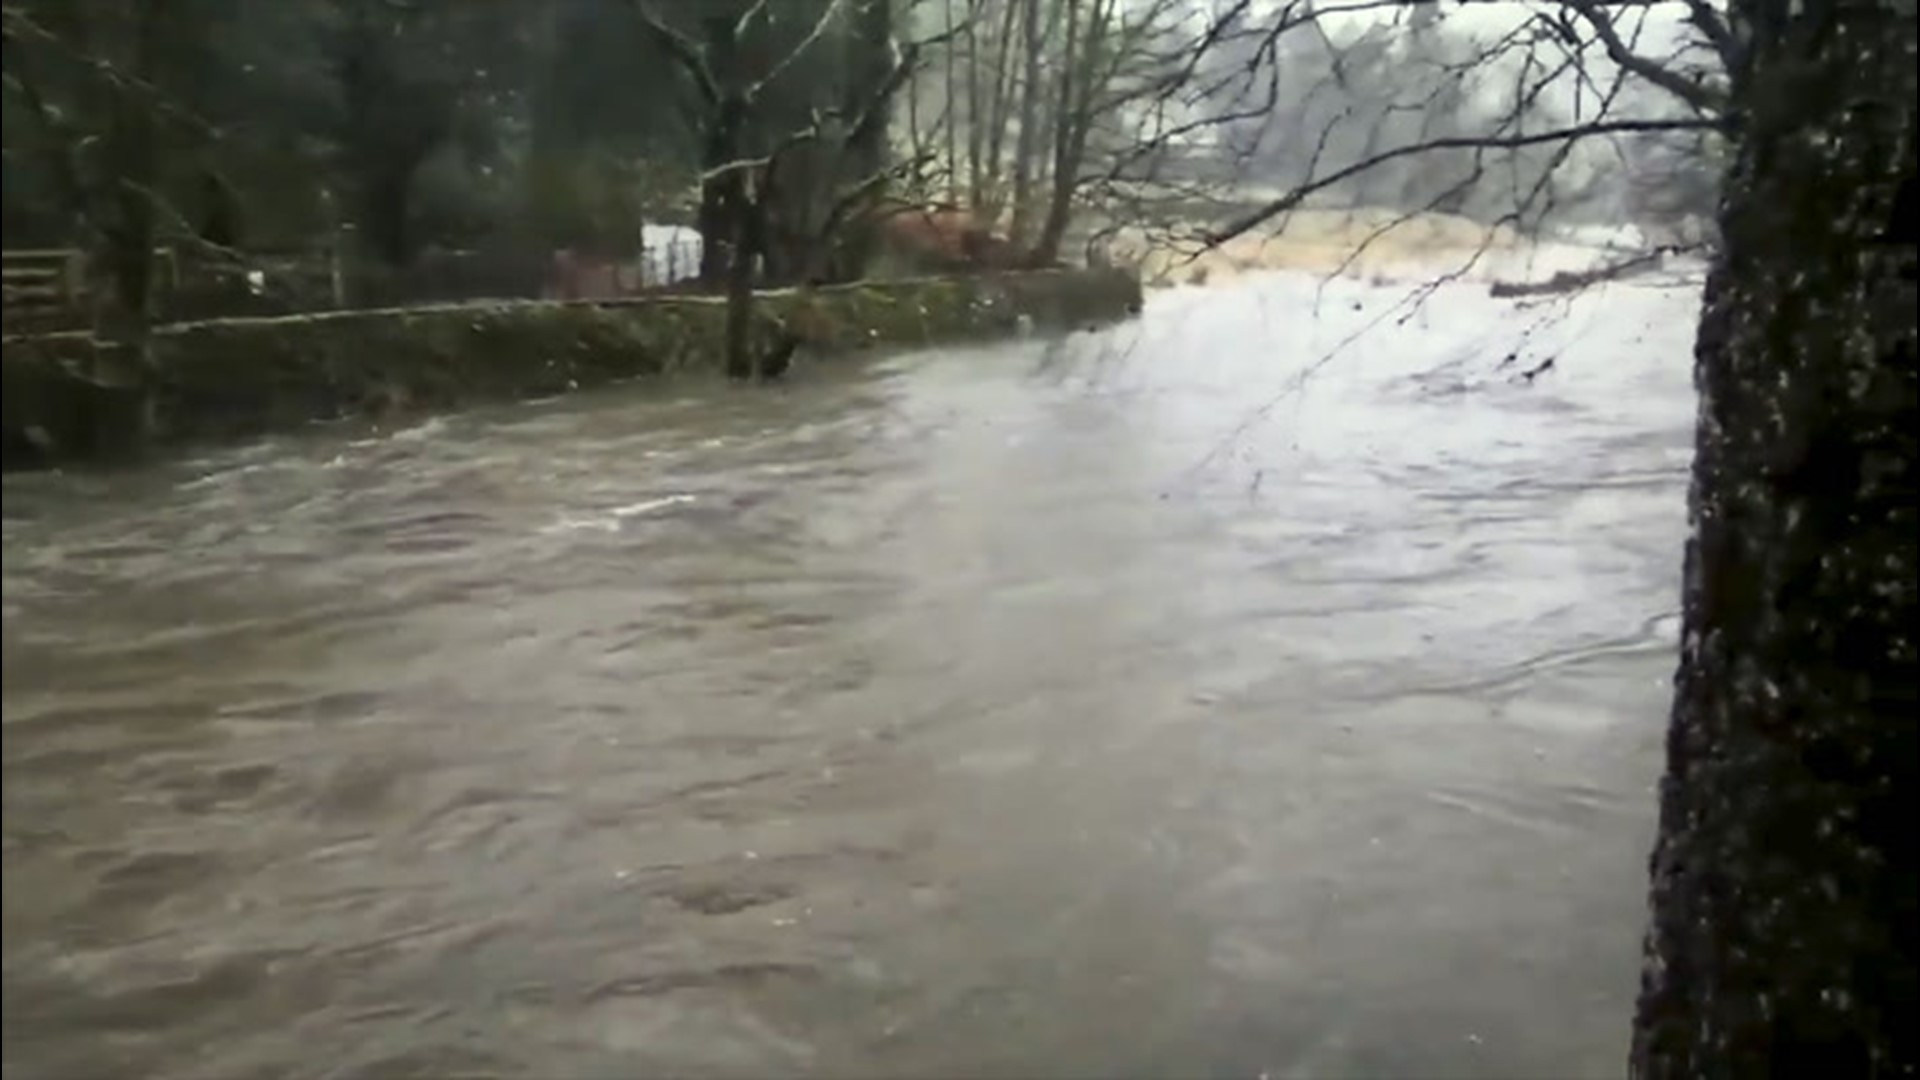 The immense amount of rain that hit Ambleside, England, due to Storm Dennis, caused the Rothay River to break its banks on Feb. 15.